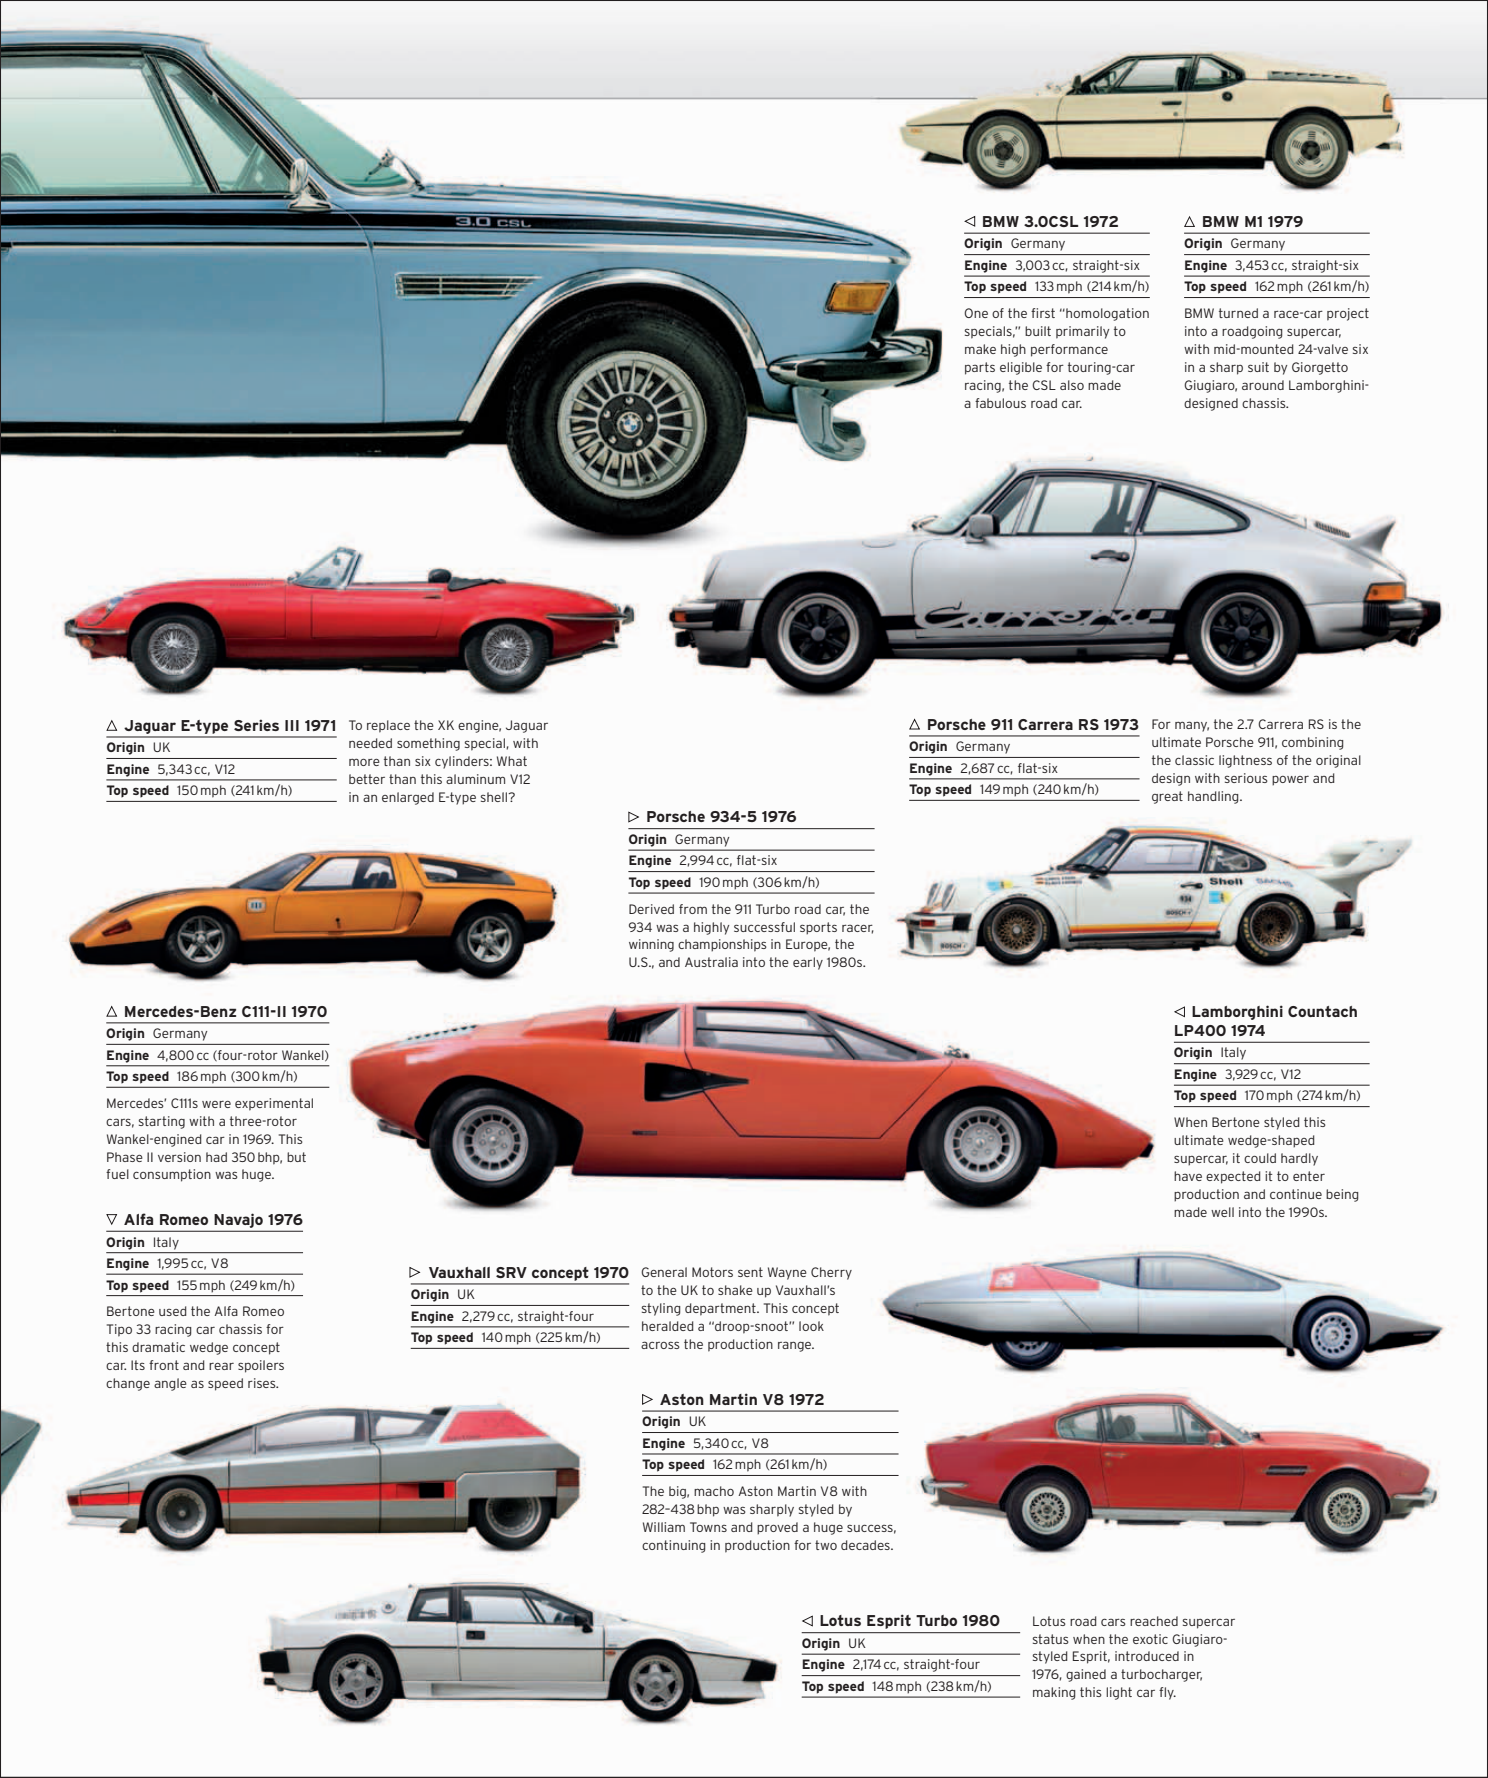 Car%20-%20The%20Definitive%20Visual%20History%20of%20the%20Automobile_213.png